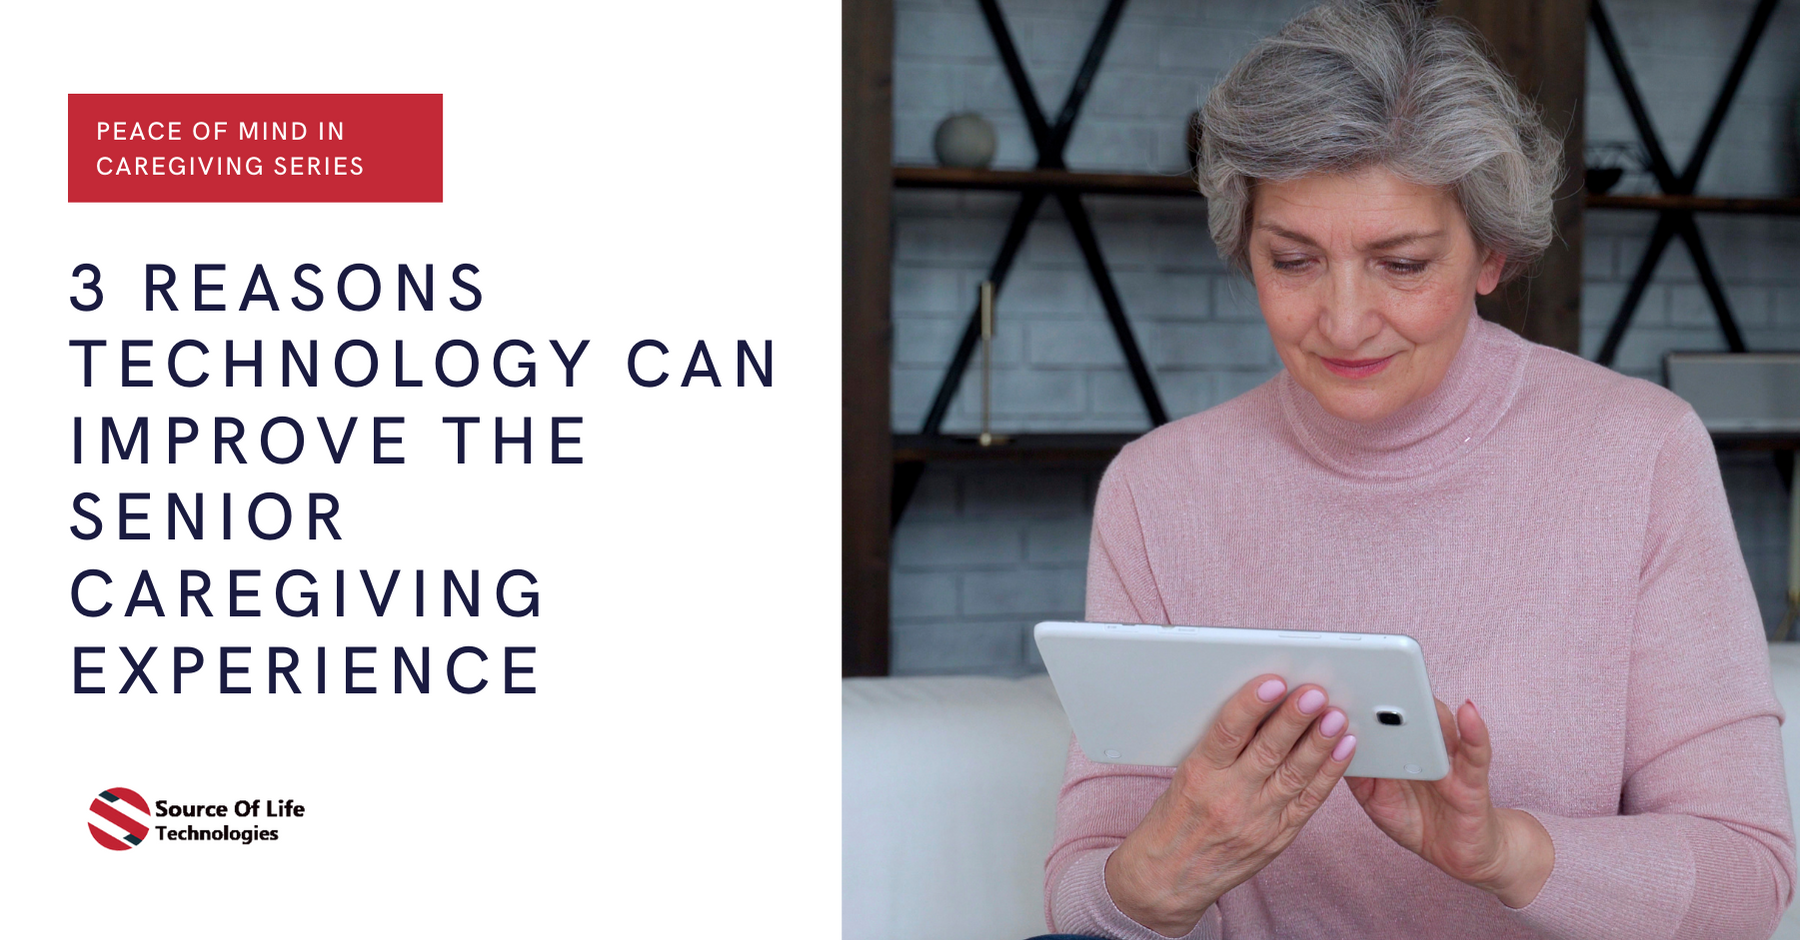 Peace of Mind in Caregiving Series: 3 Reasons Technology Can Improve the Senior Caregiving Experience